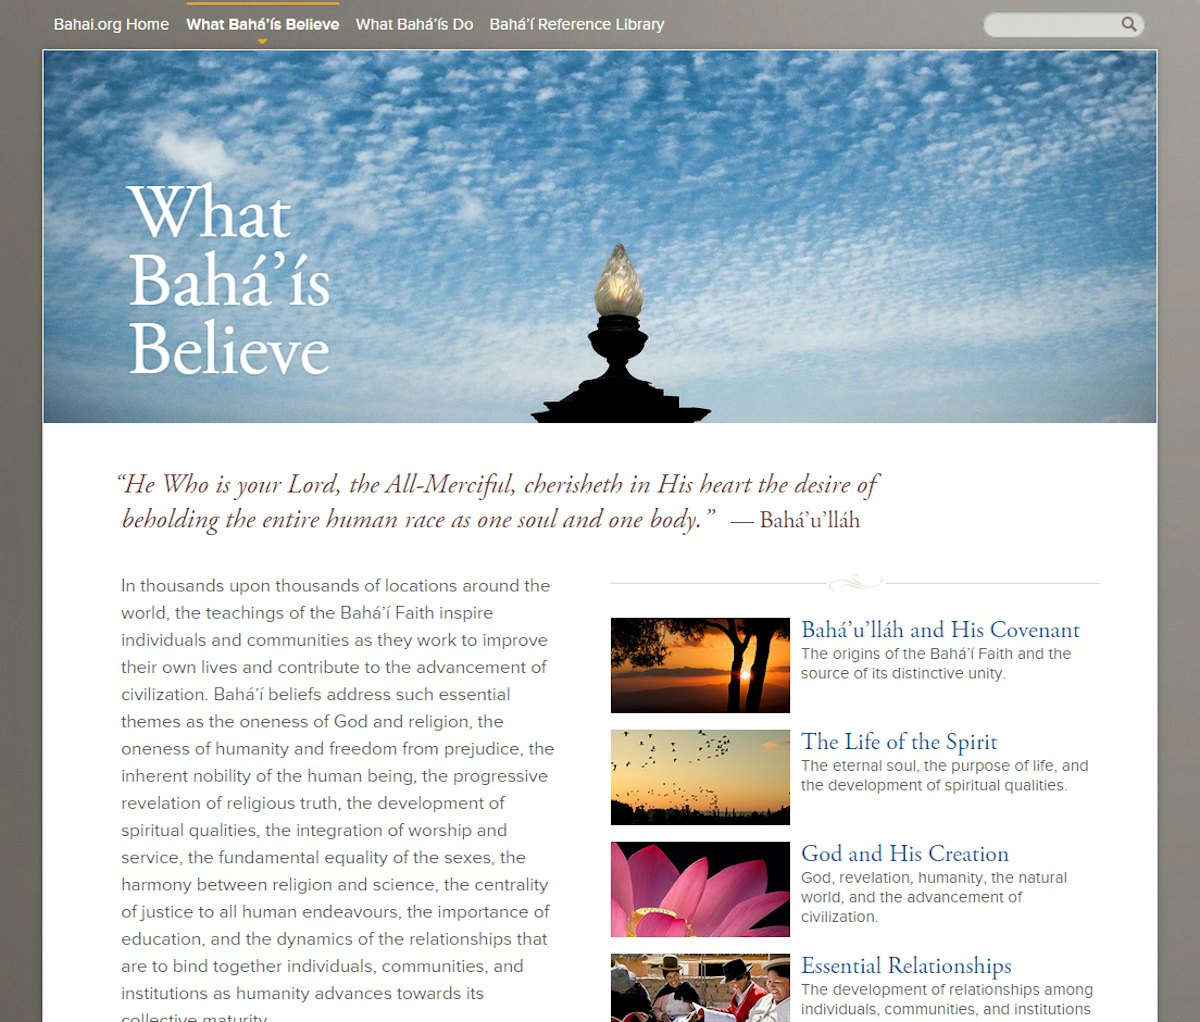 The landing page for the "What Baha'is Believe" section of the new Bahai.org website.